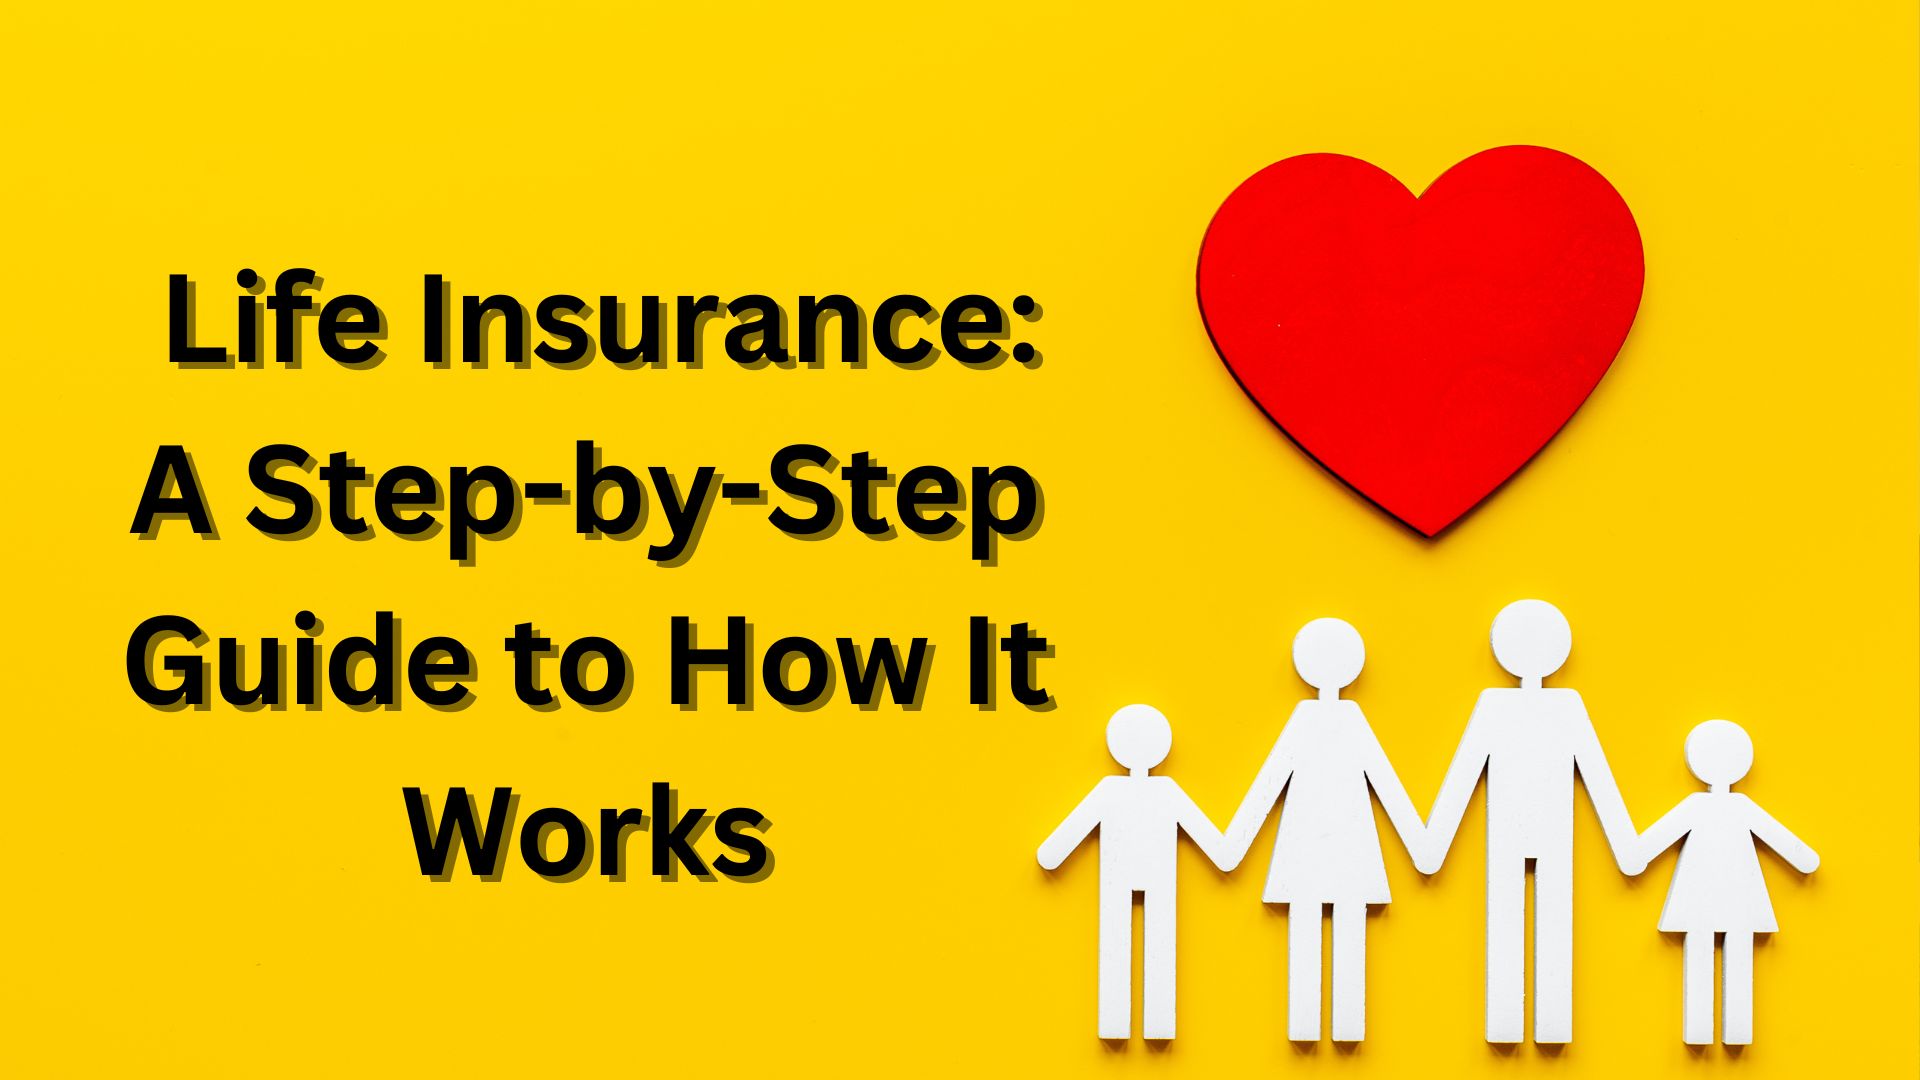 Demystifying Life Insurance: A Step-by-Step Guide to How It Works